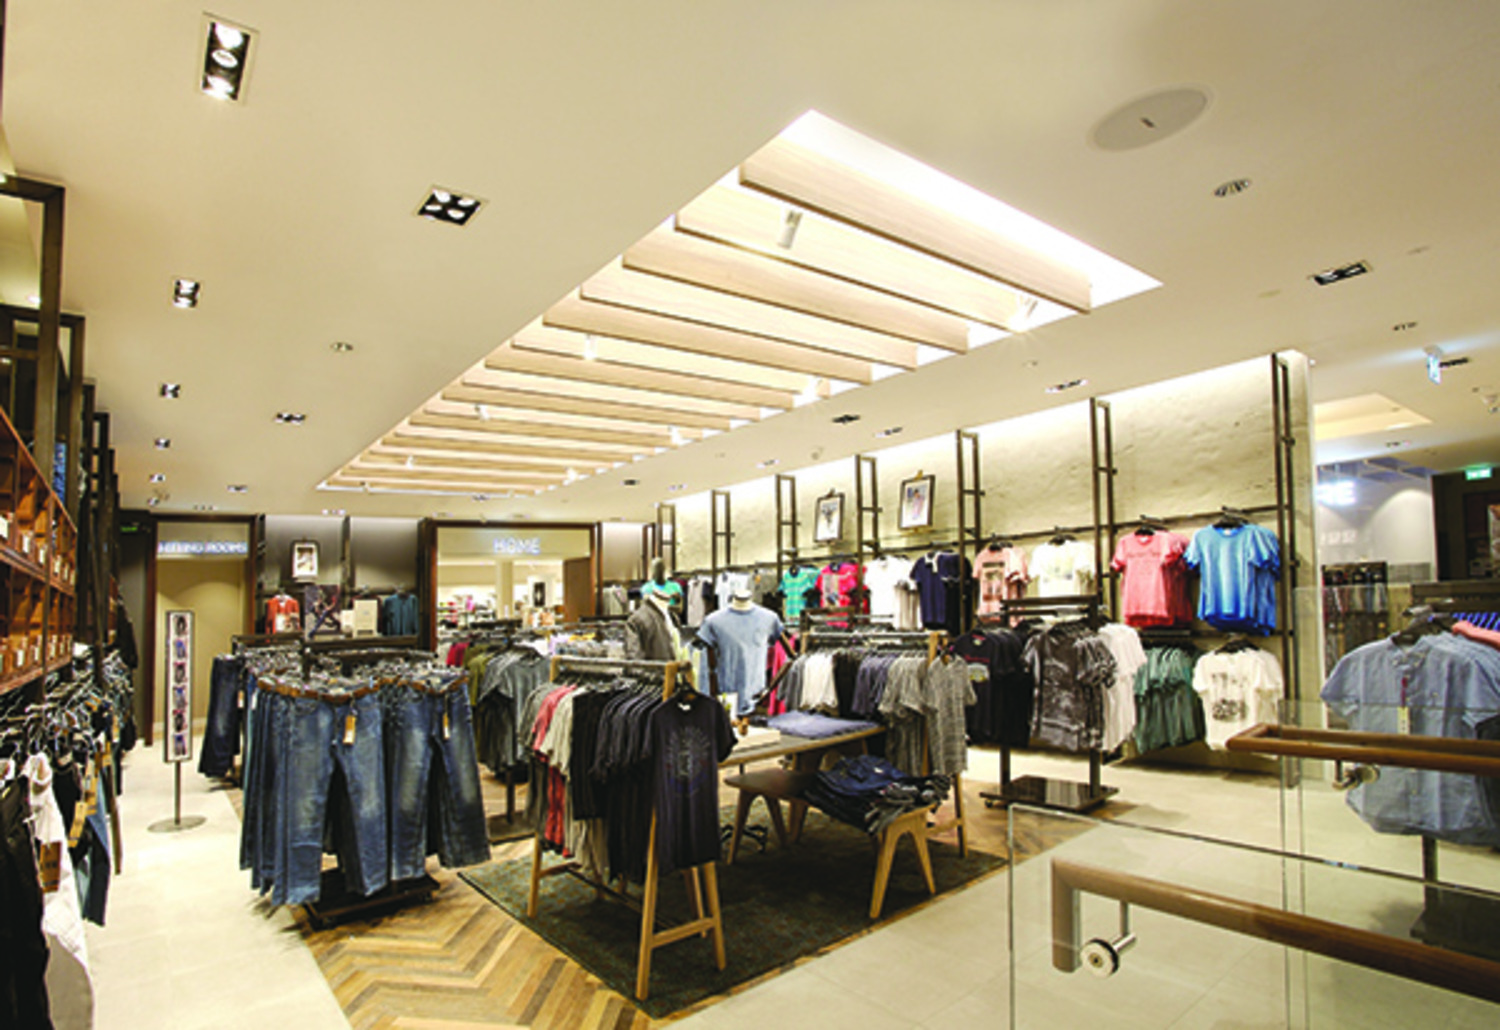 In an ongoing effort to improve efficiency and the customer experience, UK fashion retailers Next have turned their store in Rugby, Warwickshire, into a test bed for new lighting applications and technology using Lumenpulse and Lumentalk technology. Photo: Ian Robinson, courtesy Lumenpulse